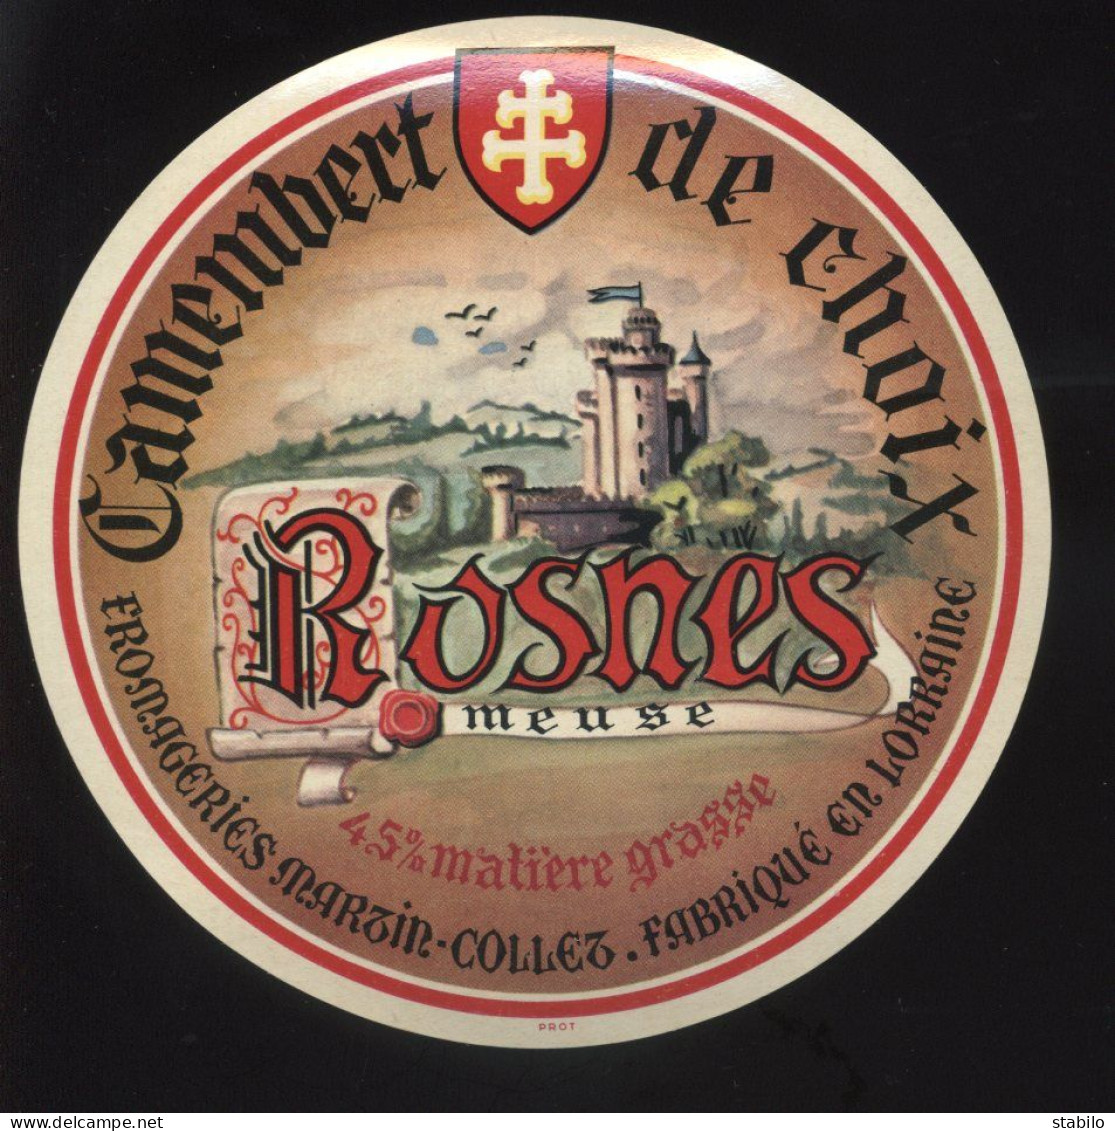 ETIQUETTE DE FROMAGE - CAMEMBERT ROSNES - FROMAGERIE MARTIN-COLLET, ROSNES (MEUSE) - Fromage